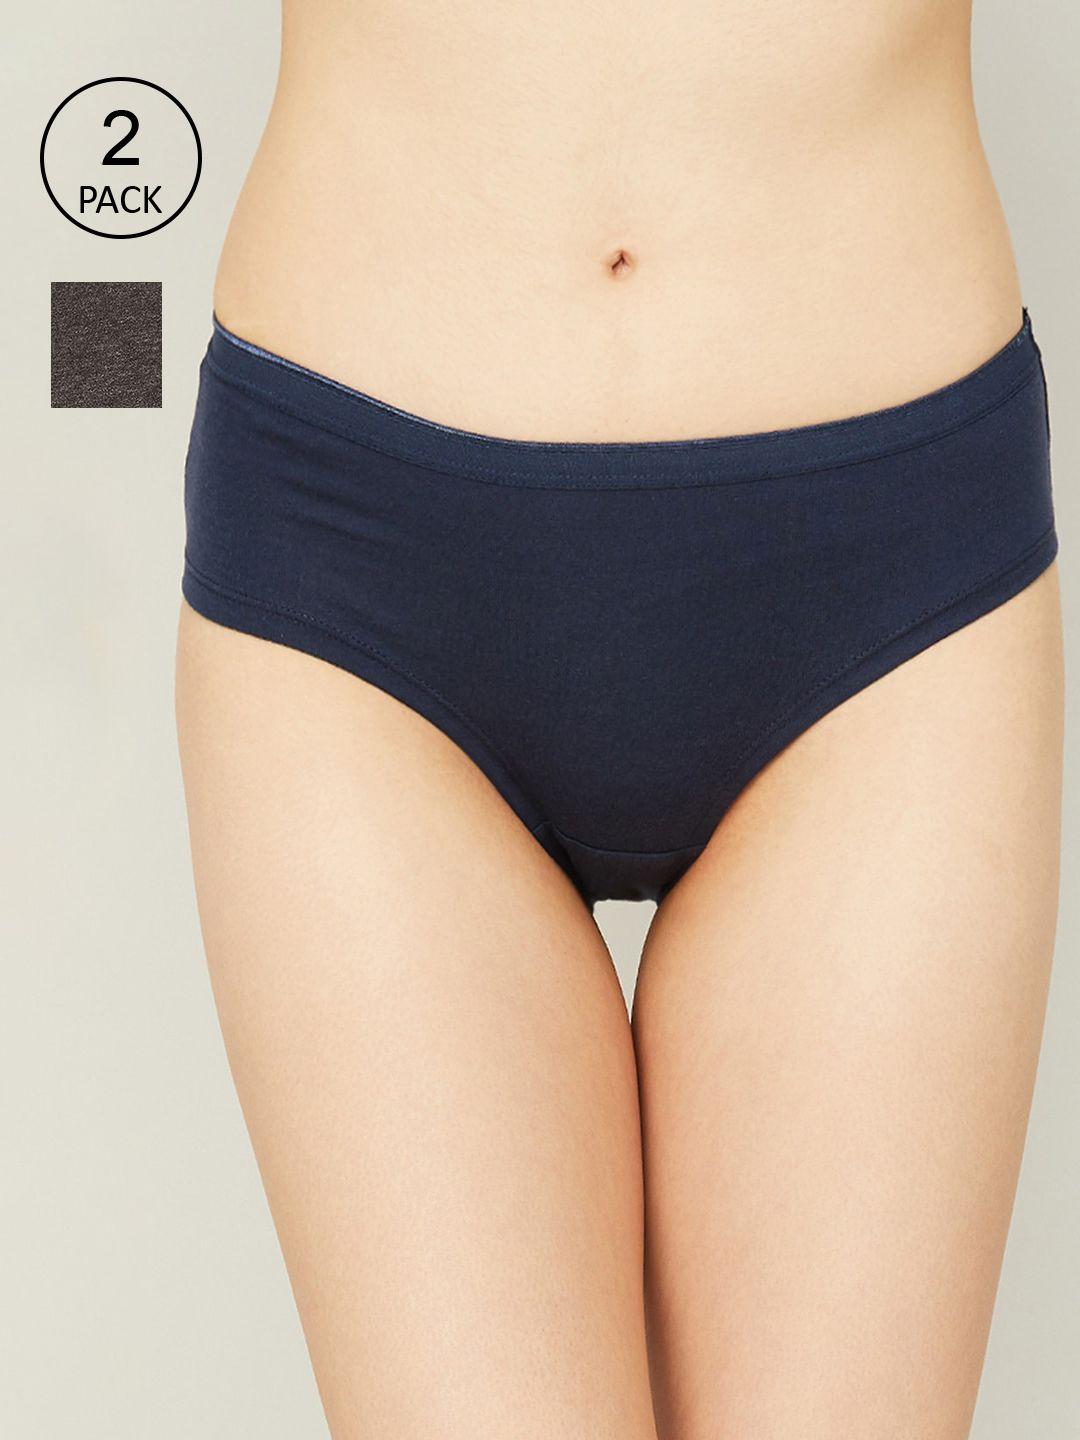 ginger by lifestyle pack of 2 hipster briefs